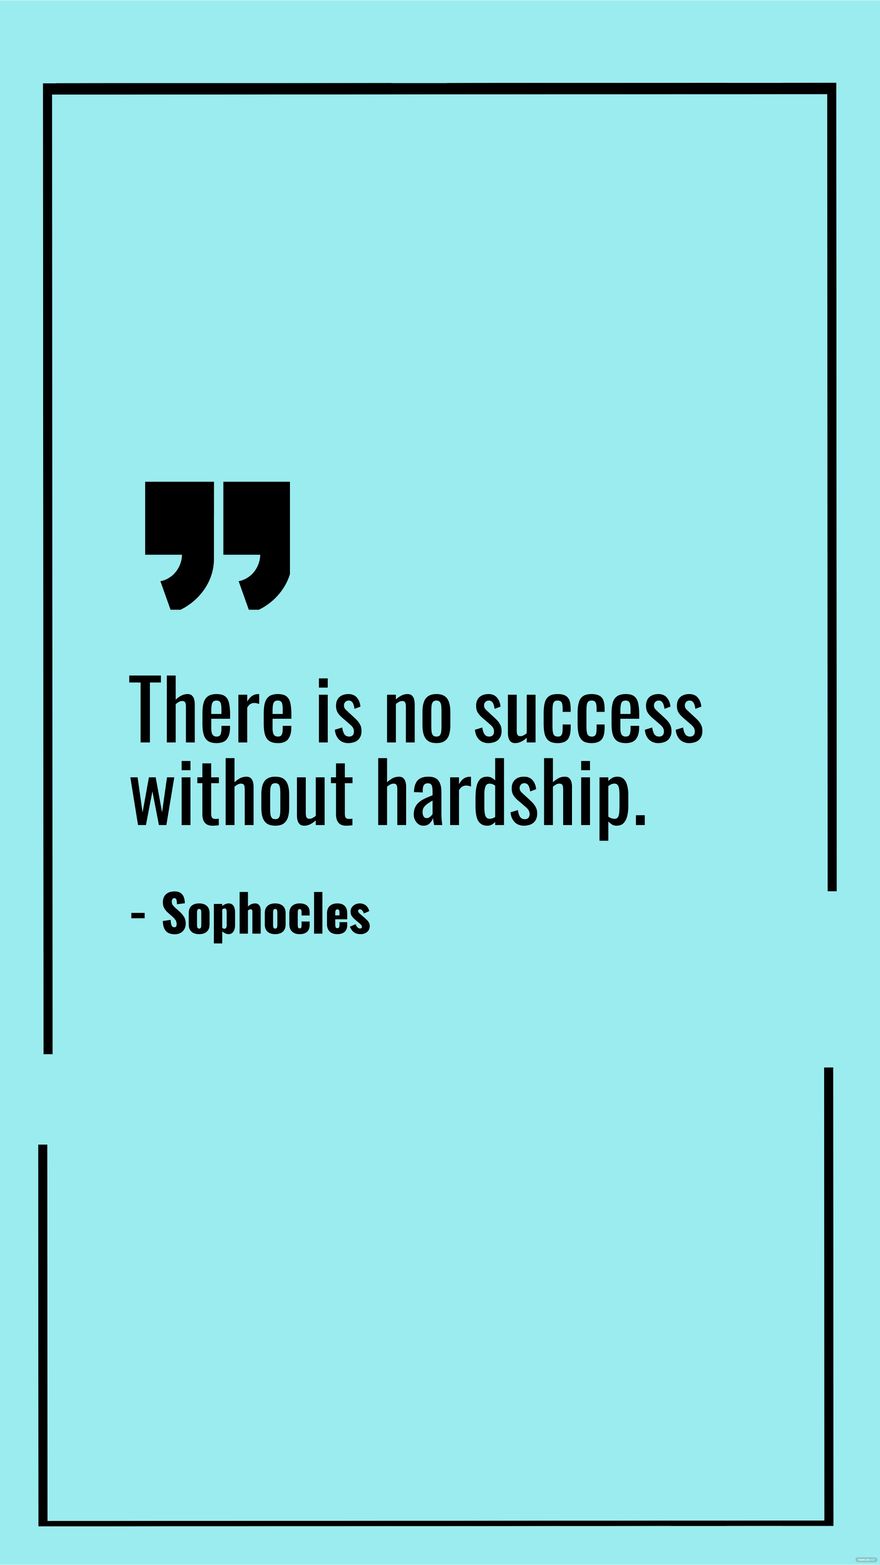 Sophocles - There is no success without hardship. in JPG